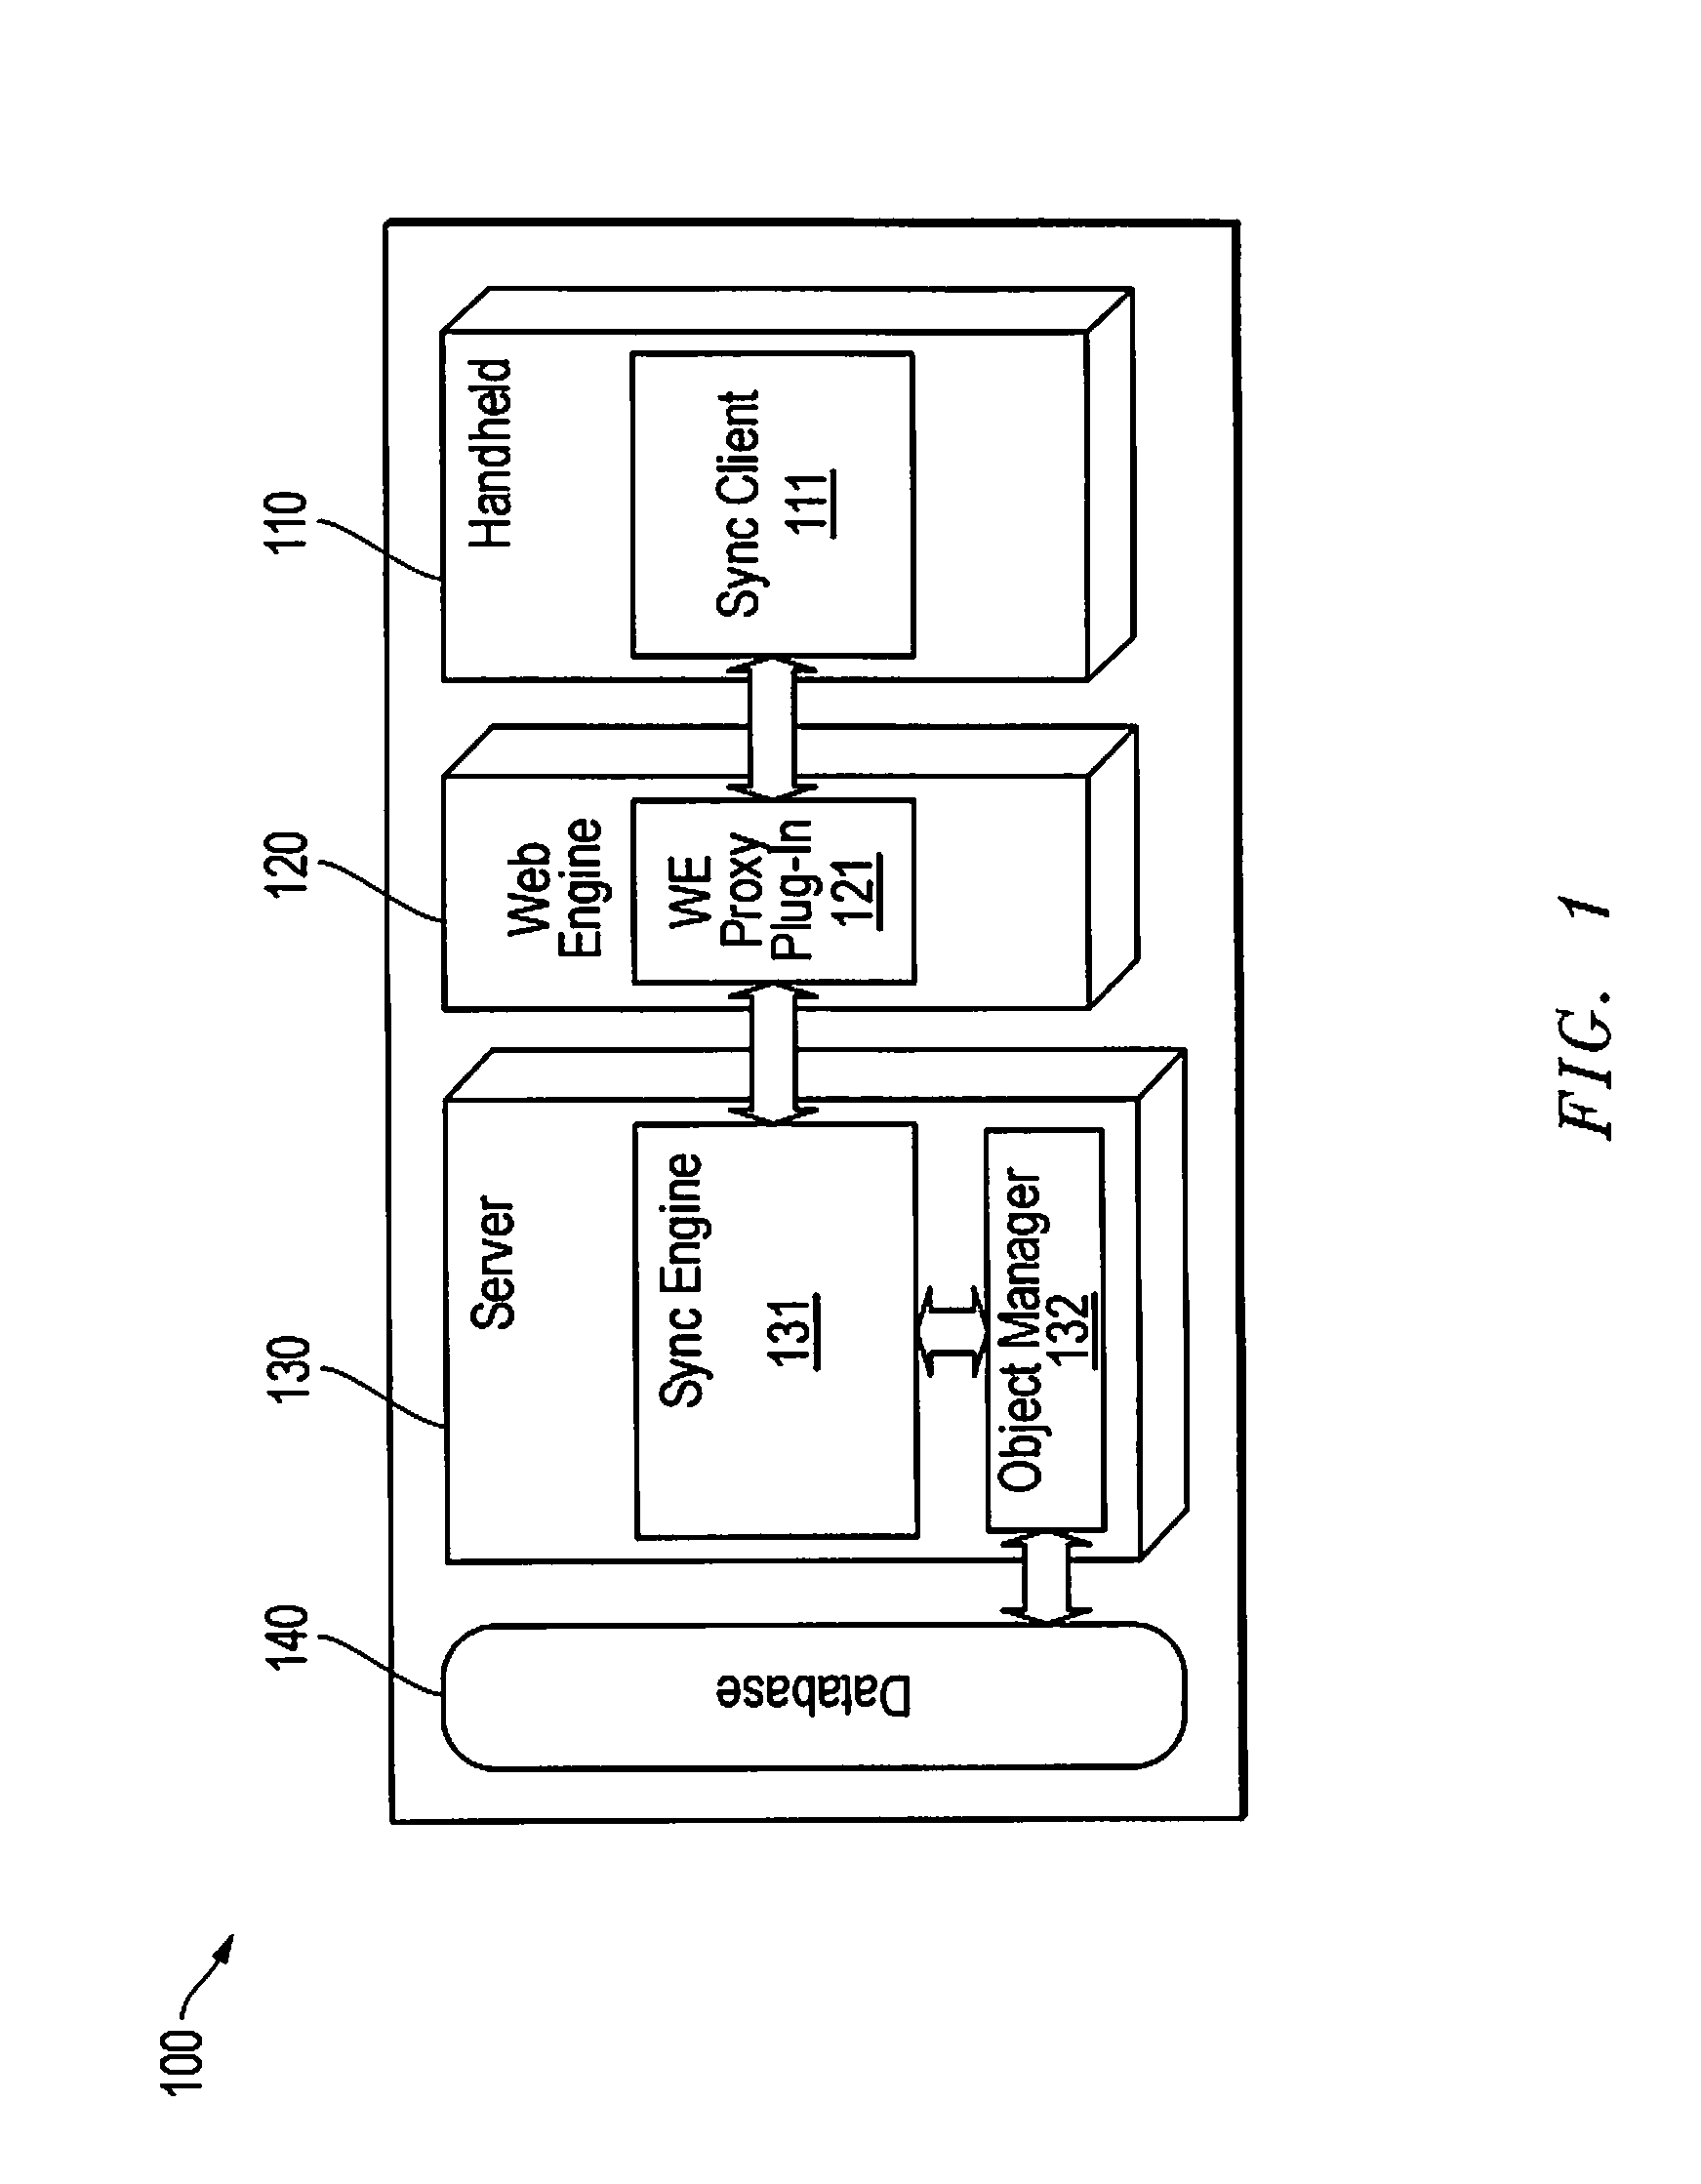 Method and system for direct server synchronization with a computing device